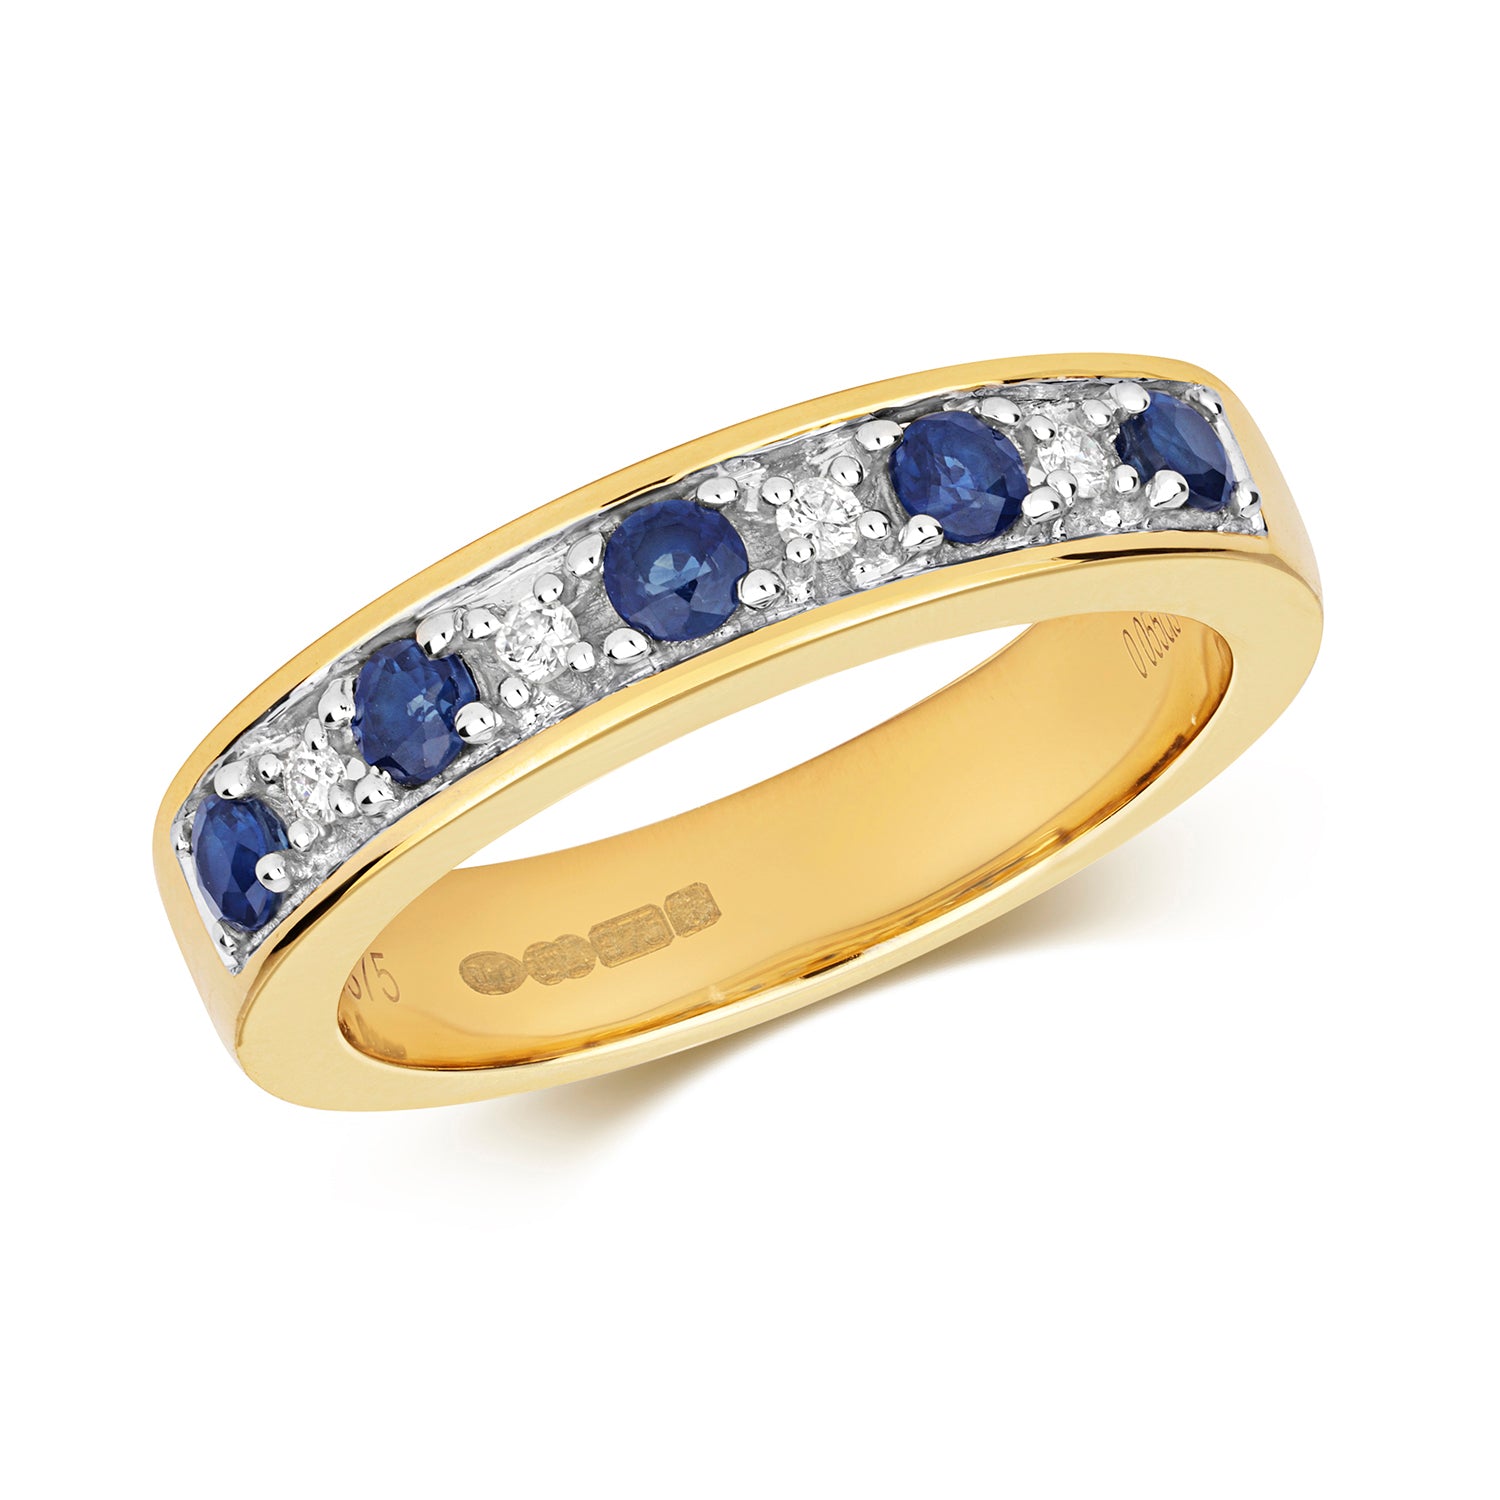 DIAMOND & SPAPHIRE HALF ETERNITY RING IN 9CT GOLD